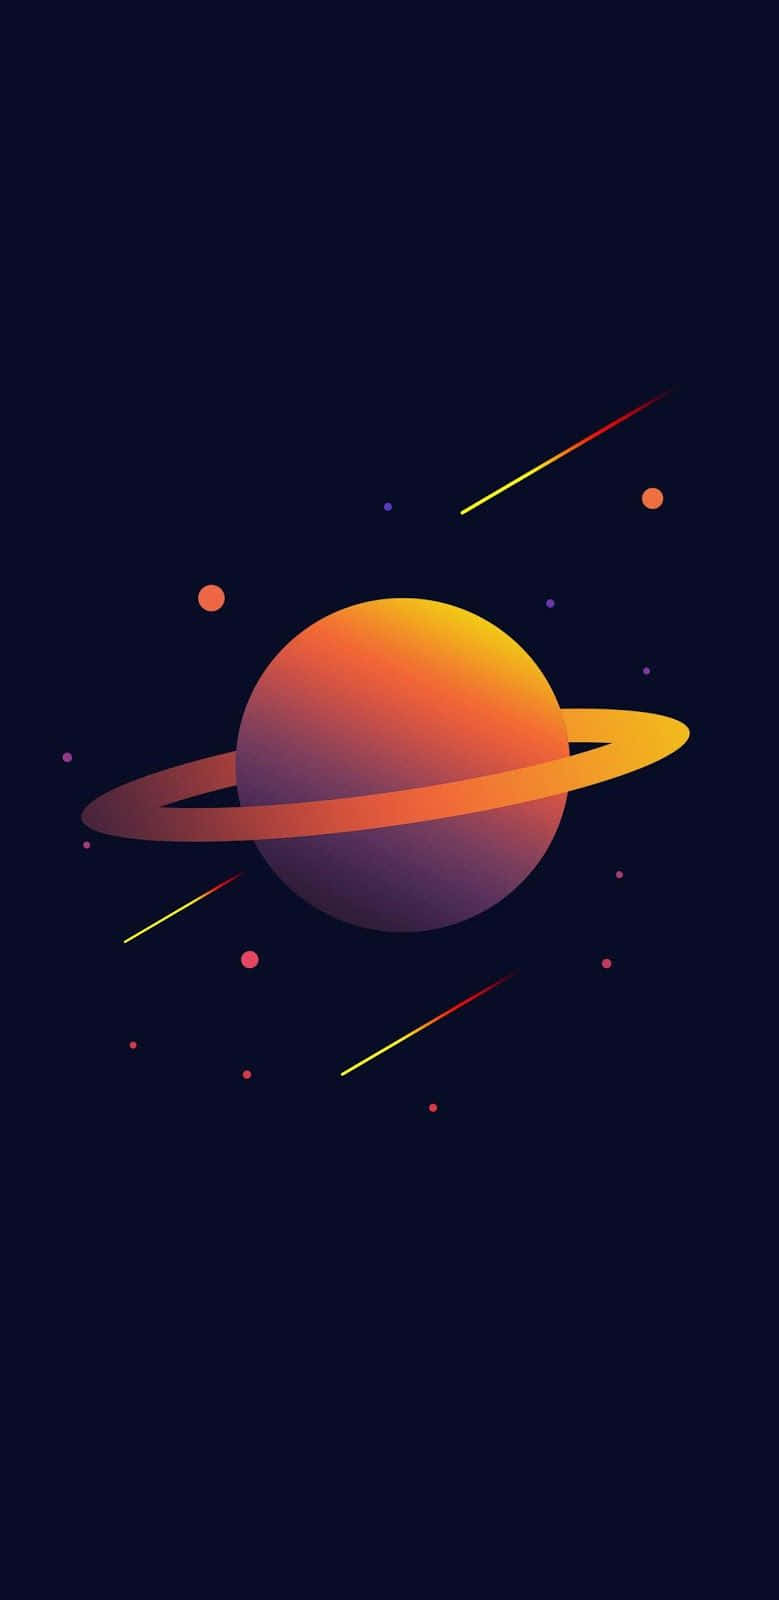 A Saturn In Space With Stars And Planets Wallpaper